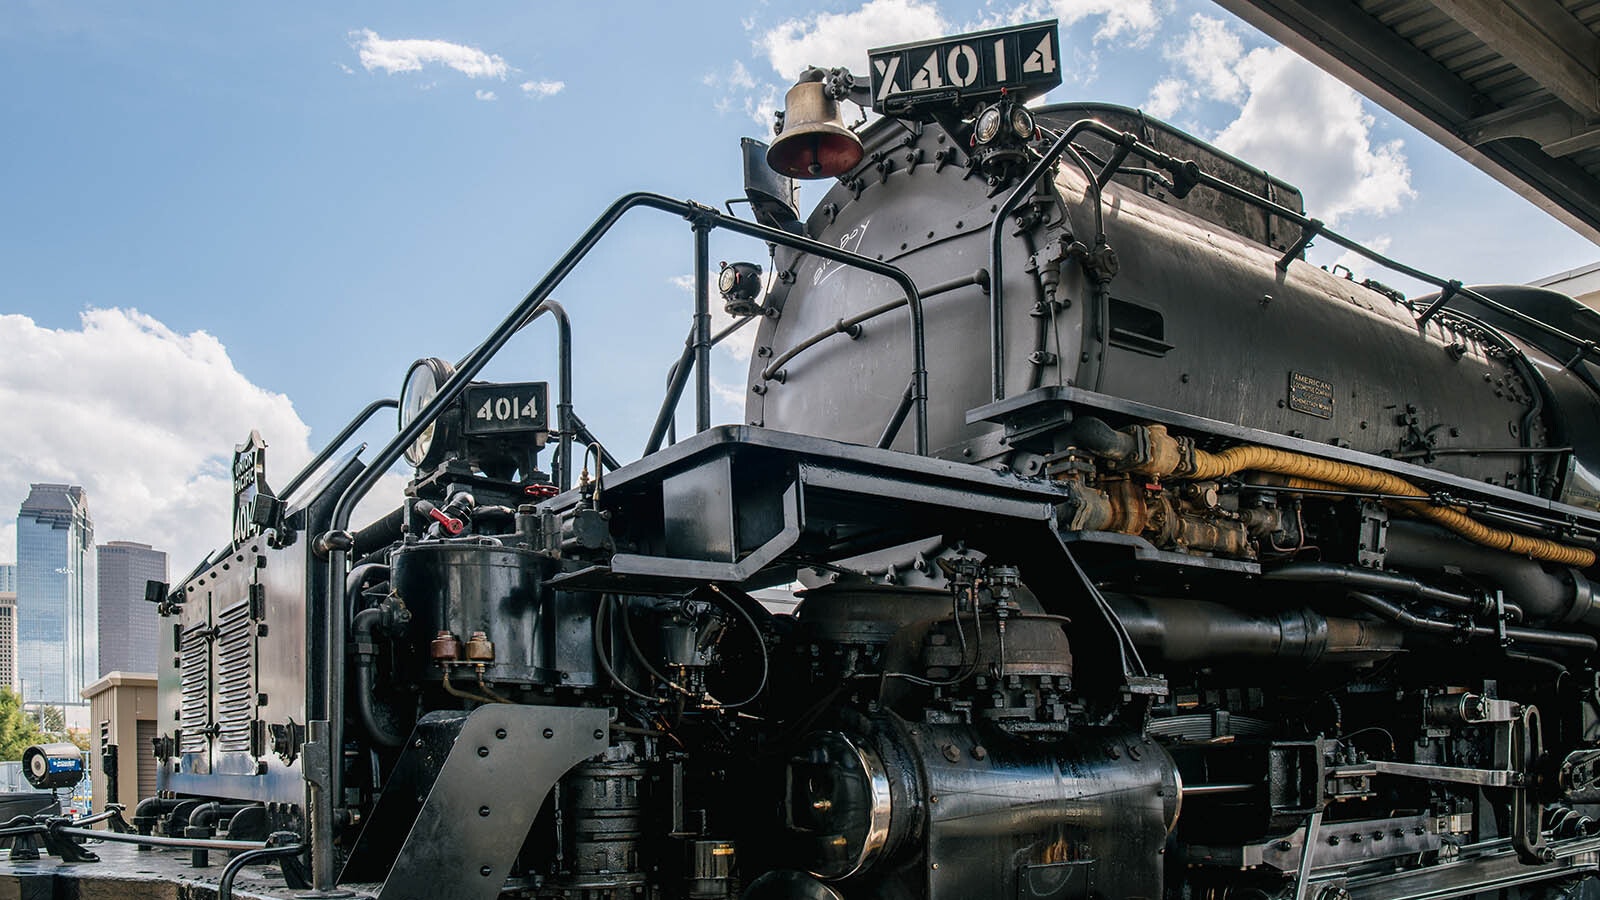 Big Boy 4014 during a stop in Houston, Texas, in 2021.